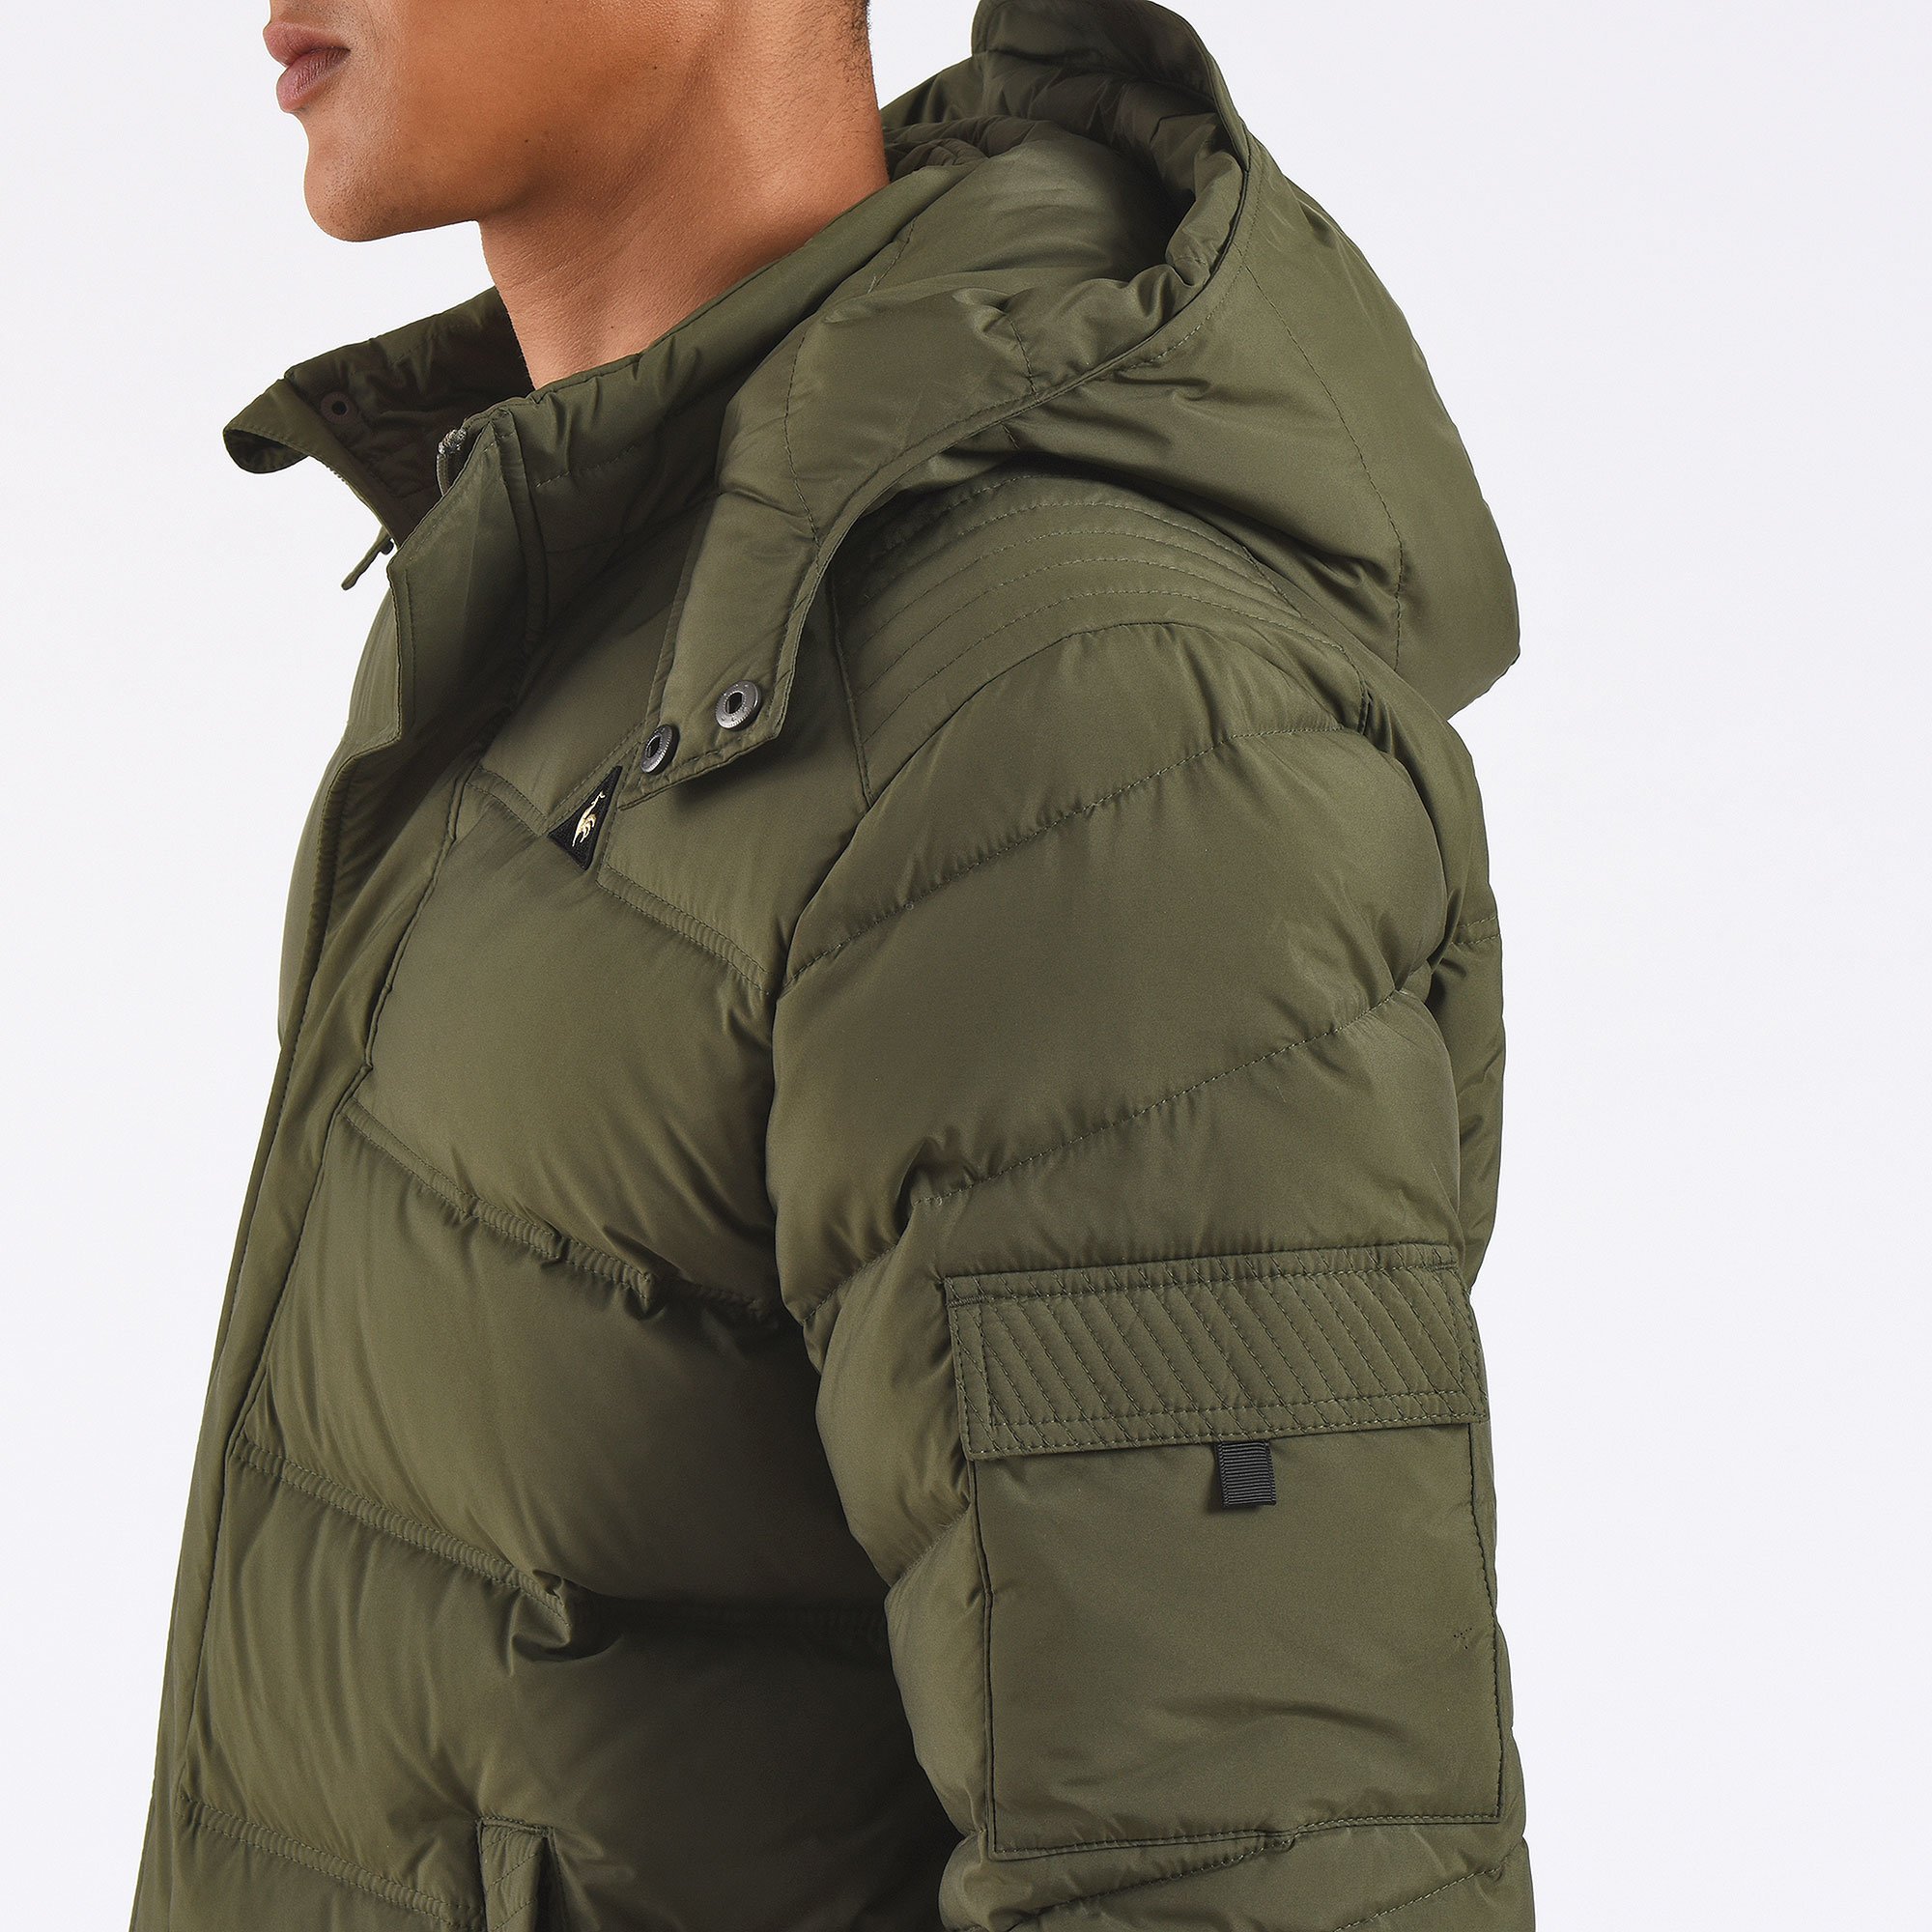 LE COQ SPORTIF on X: A closer look at the le coq sportif Sprinelle down  jacket. Essential for the winter months ahead! #LCSportandstyle # lecoqsportif  / X